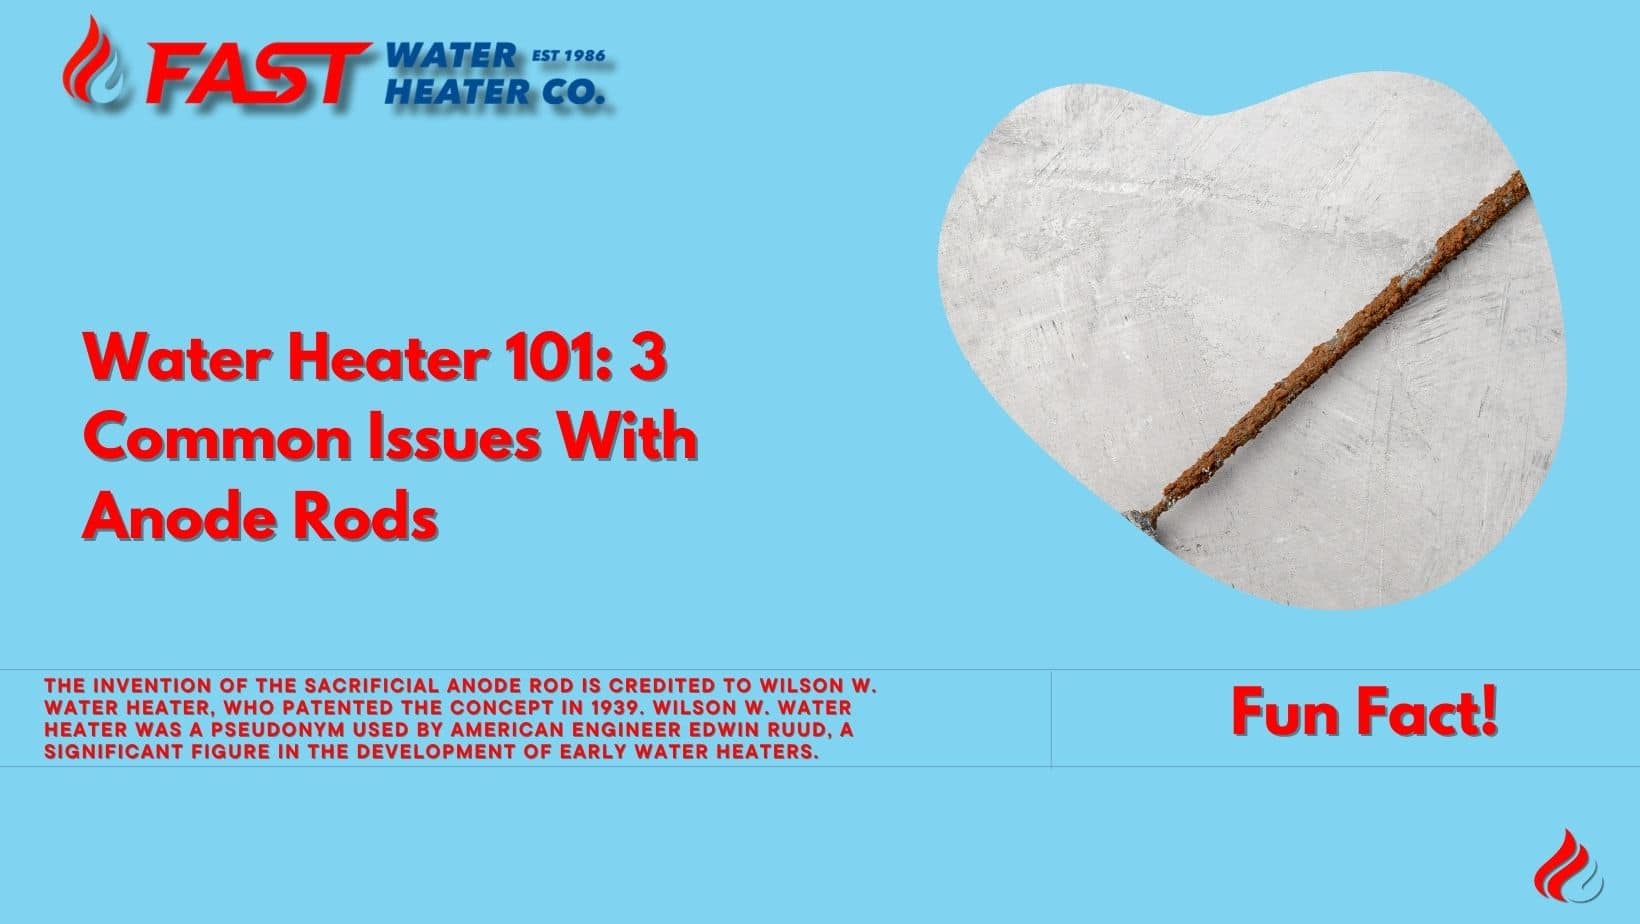 Water Heater 101: 3 Common Issues With Anode Rods